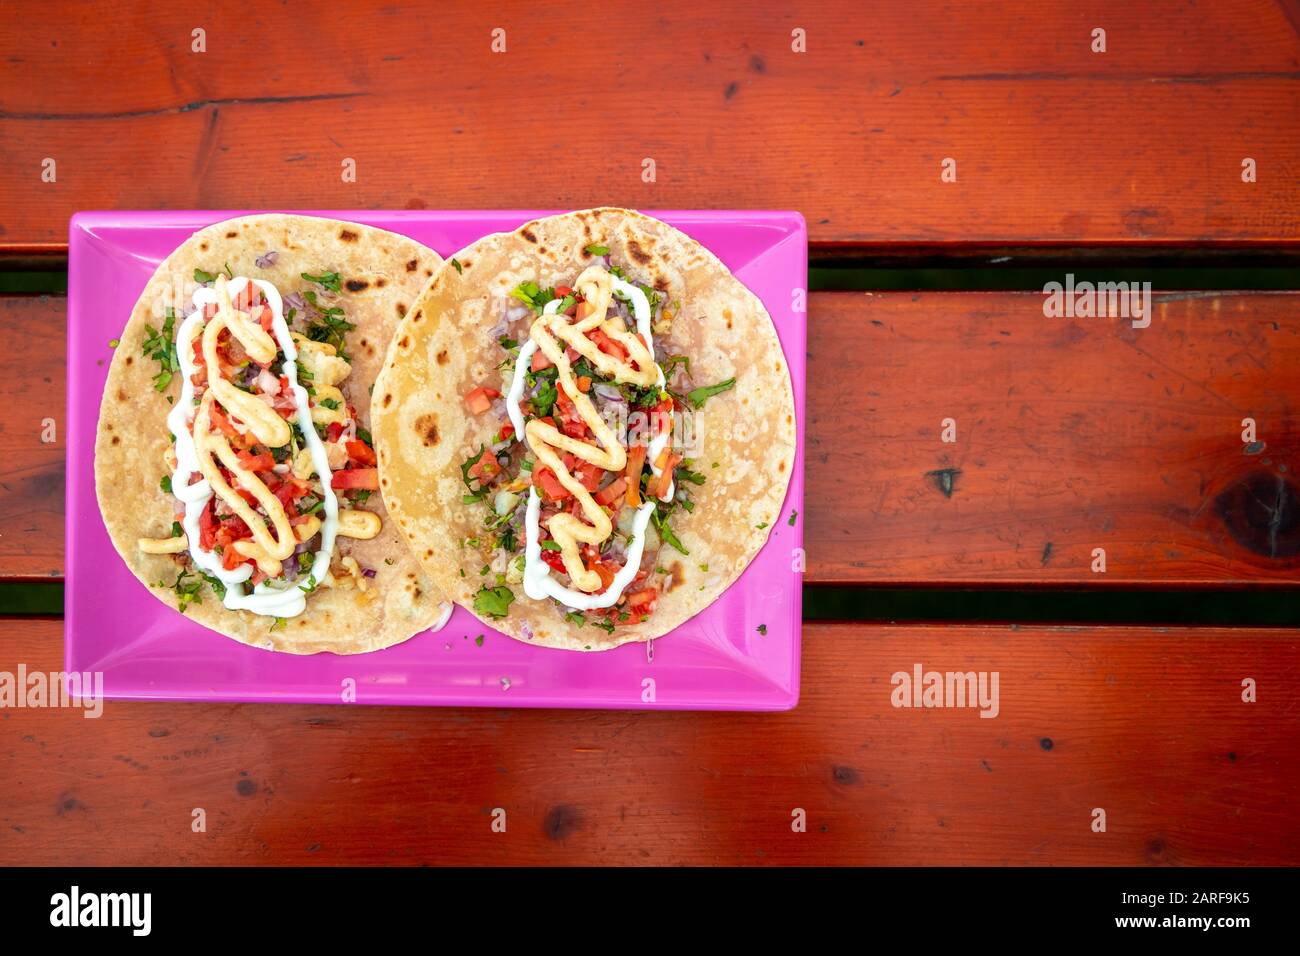 Top View of Tacos. Handmade Mexican food served in a pink plate placed on a wooden surface. Authentic Spicy Food. Stock Photo